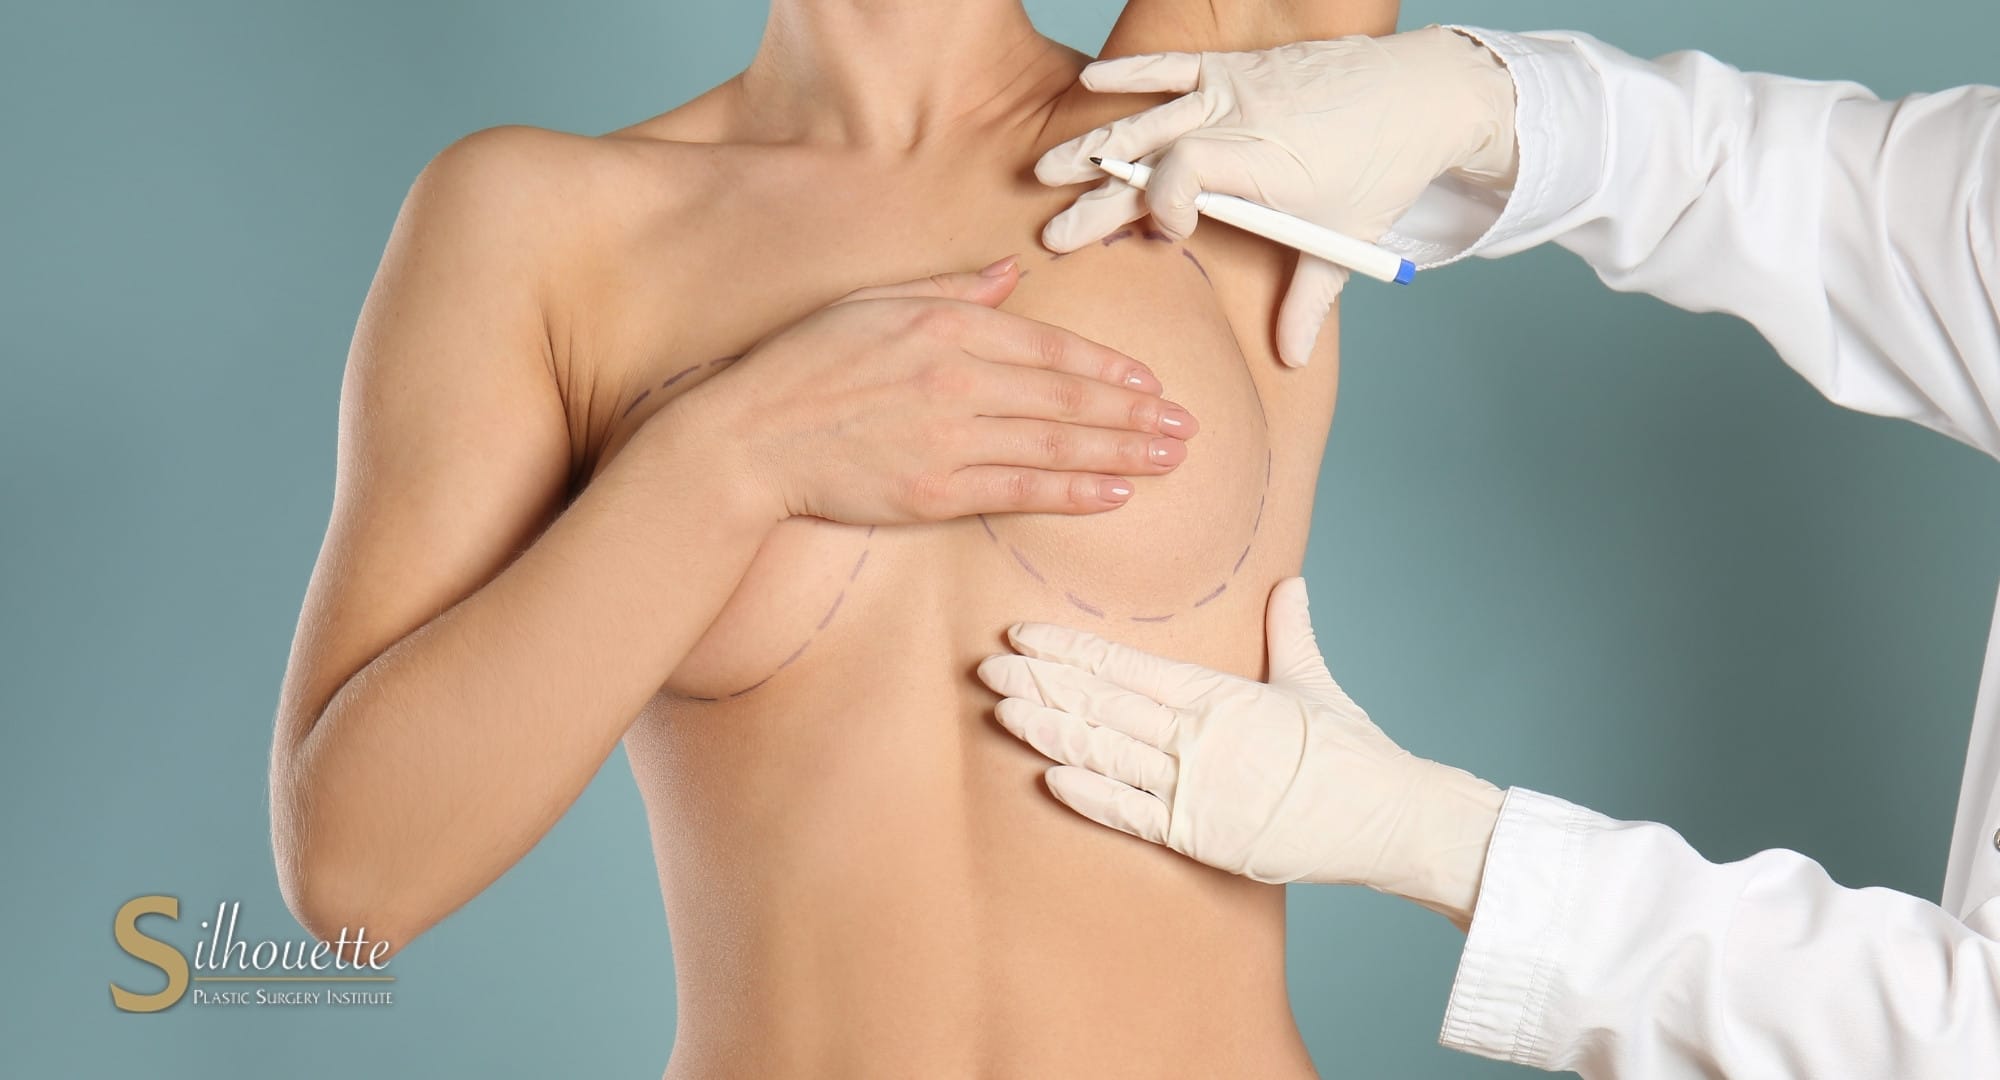 Does a Breast Lift Reduce Cup Size?